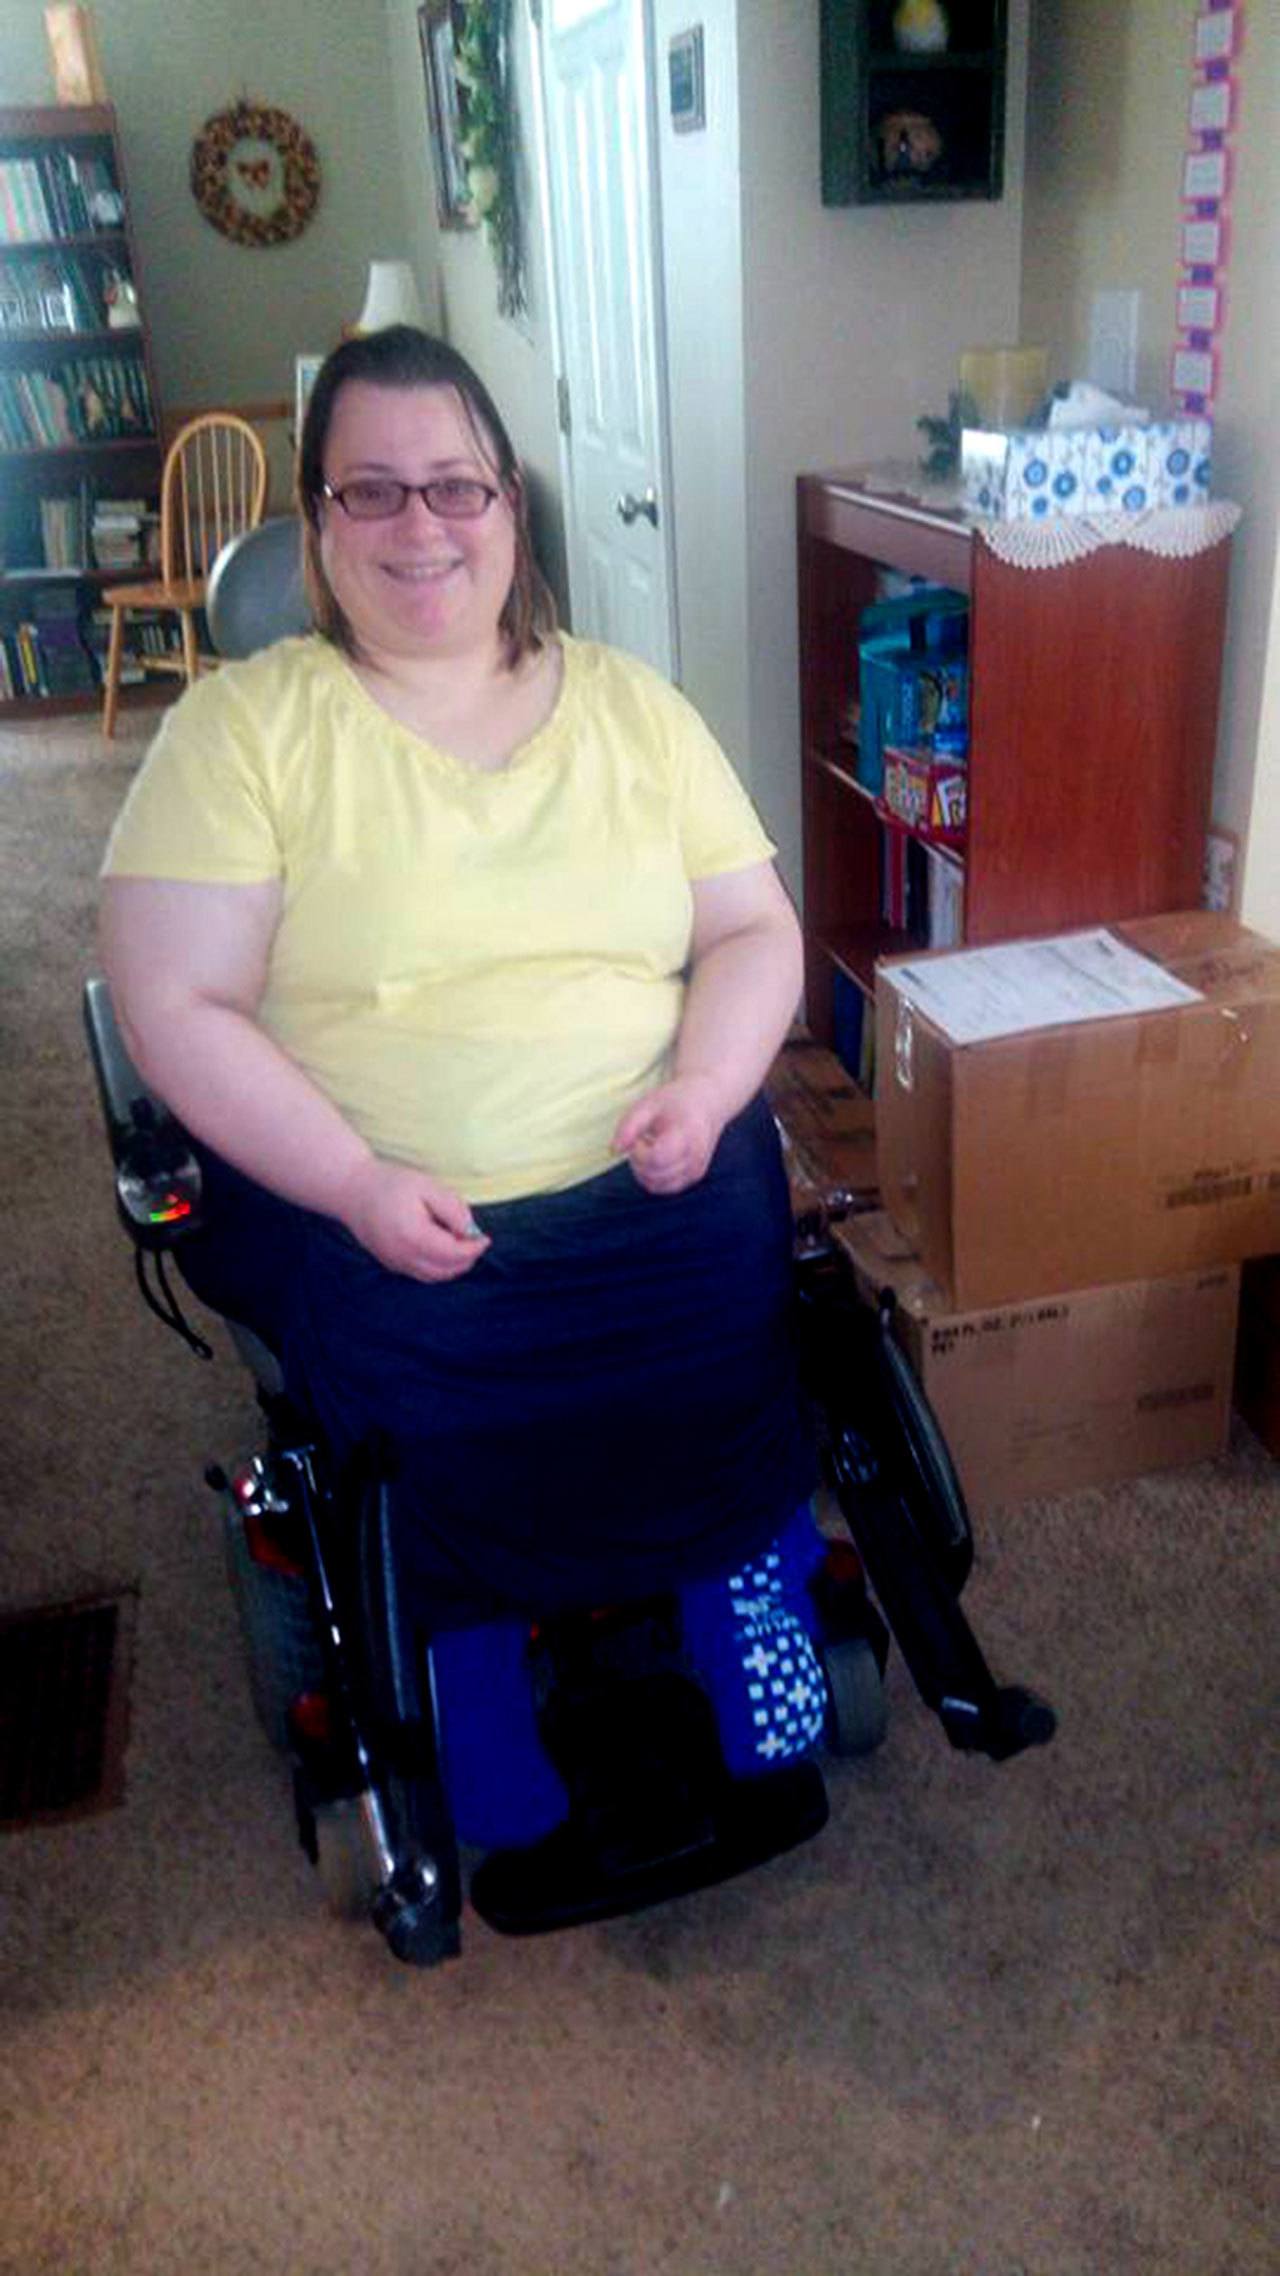 Rebecca Stebler — 31, of Shelby, Ohio — was born with spina bifida. She is seen here in her home in her new wheelchair. (Gail Allyson King)